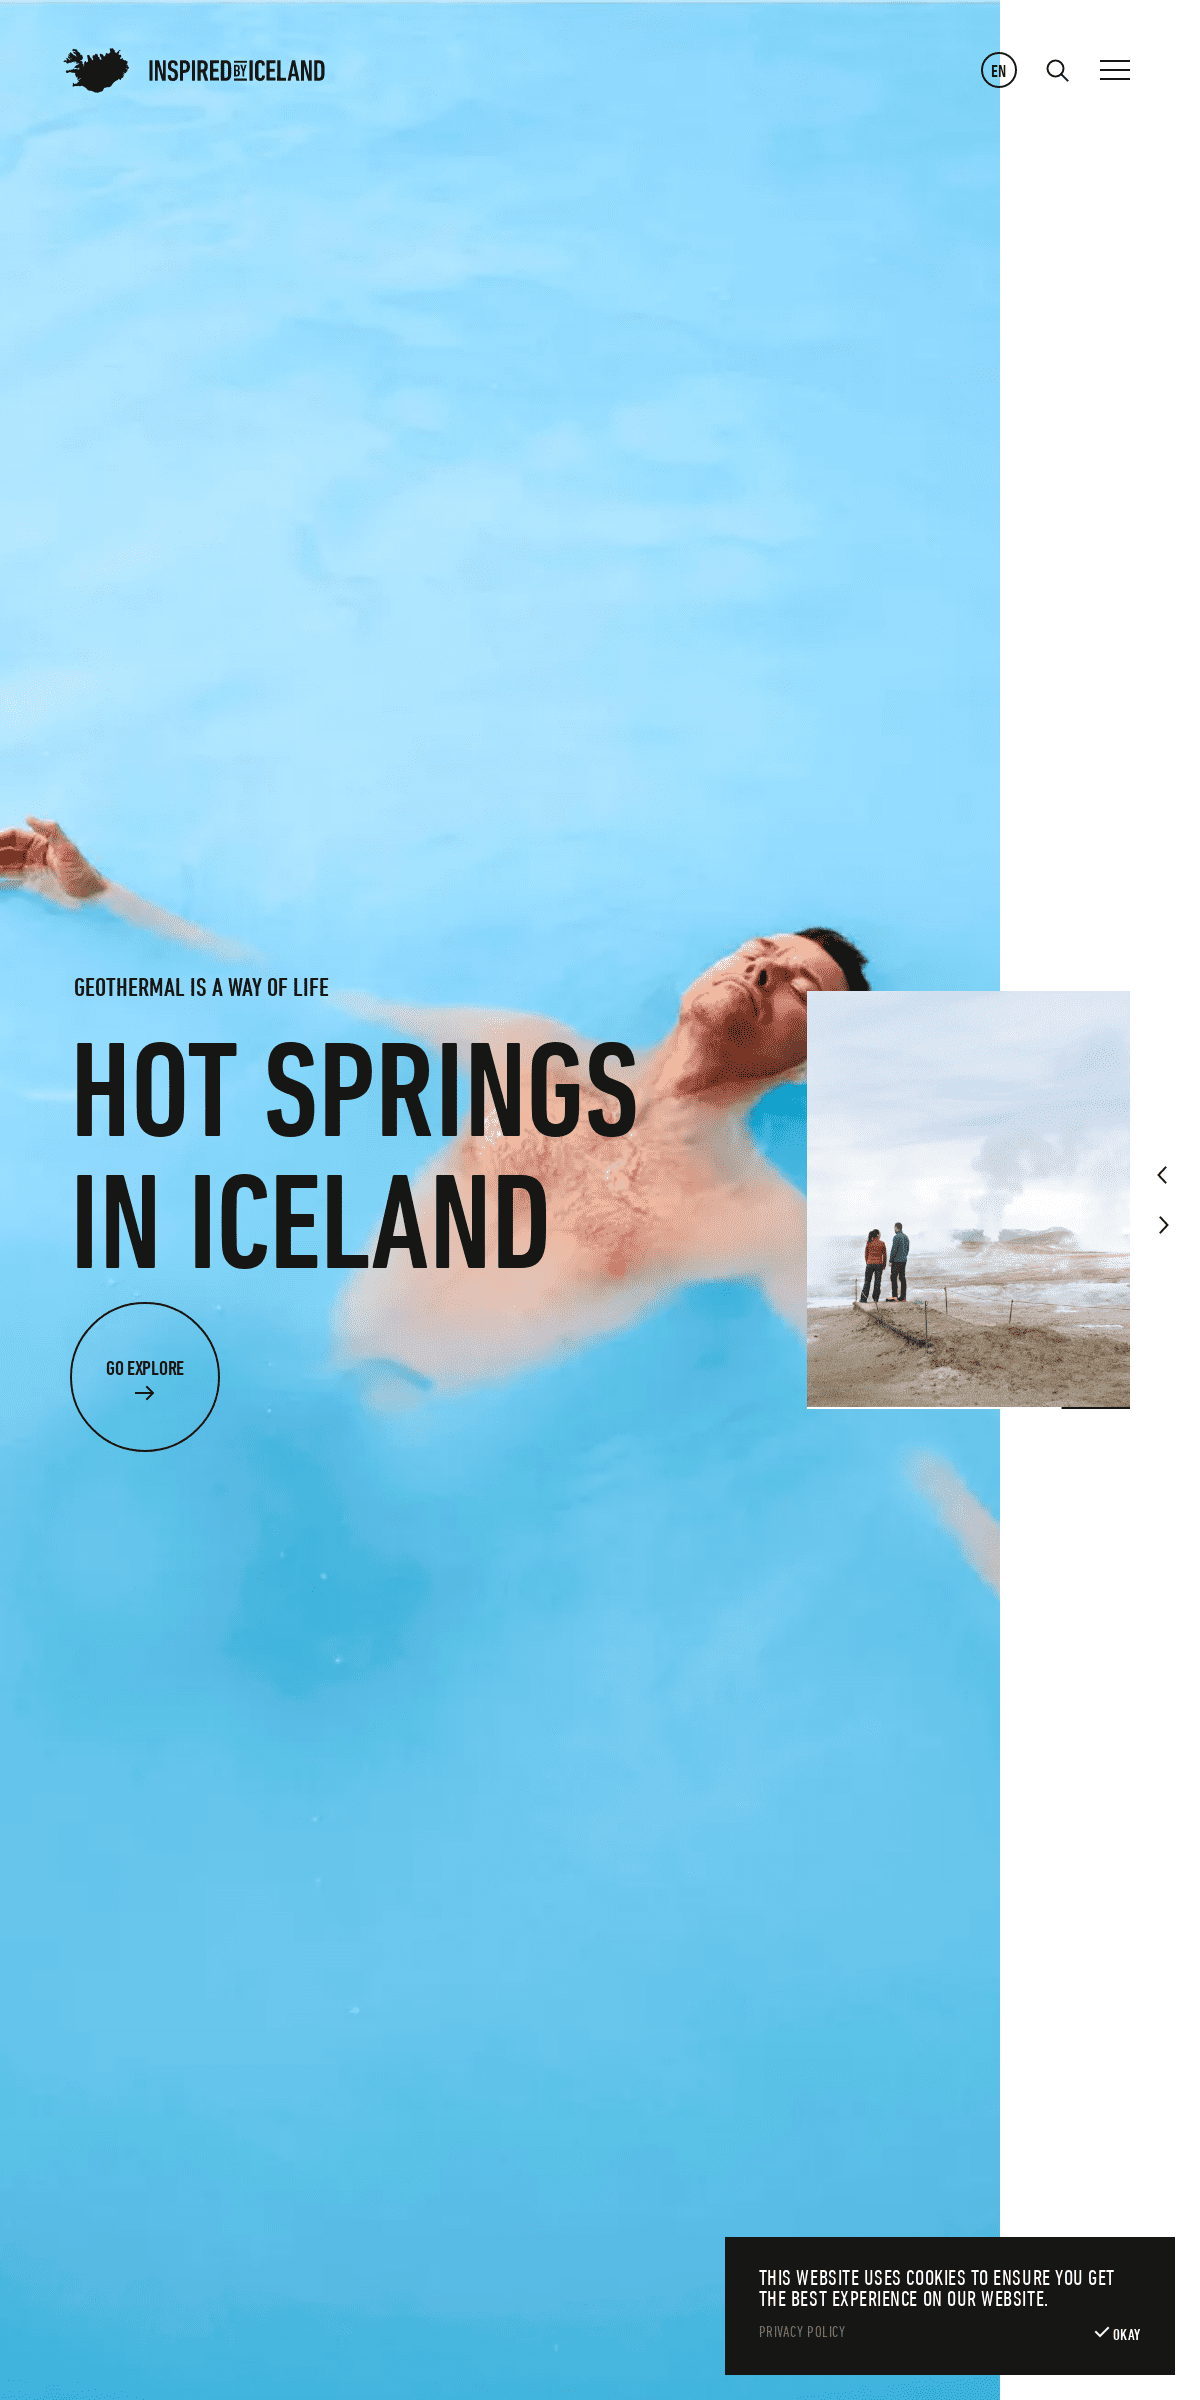 A complete backup of inspiredbyiceland.com